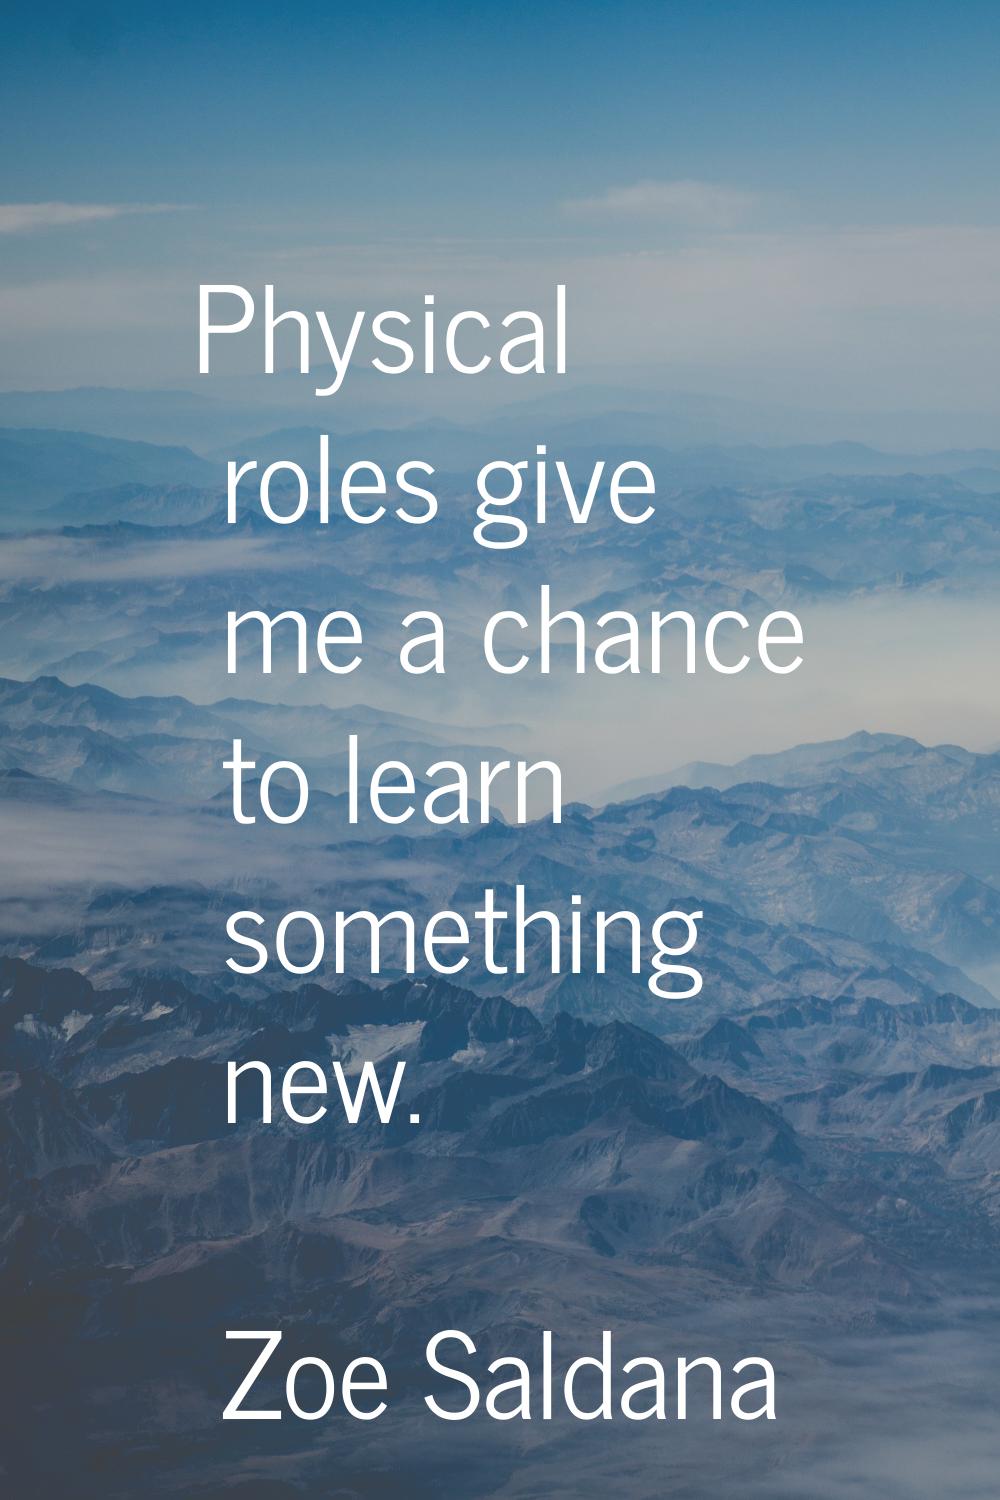 Physical roles give me a chance to learn something new.